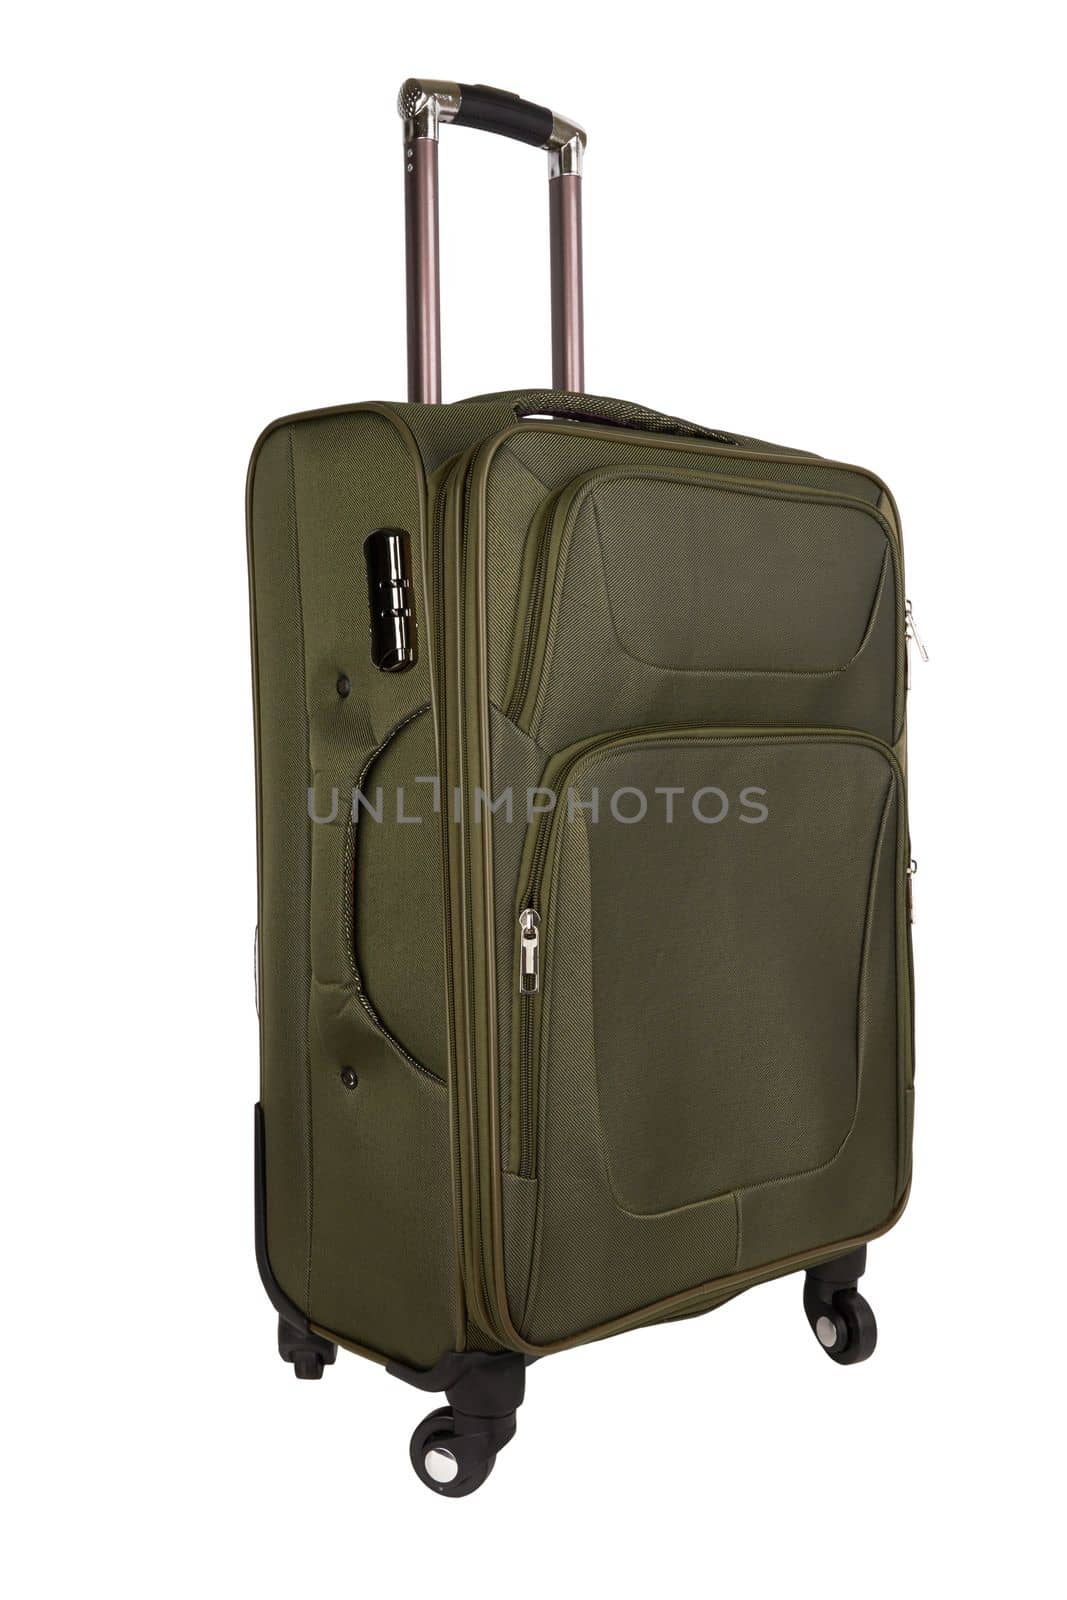 Green suitcase isolated by pioneer111